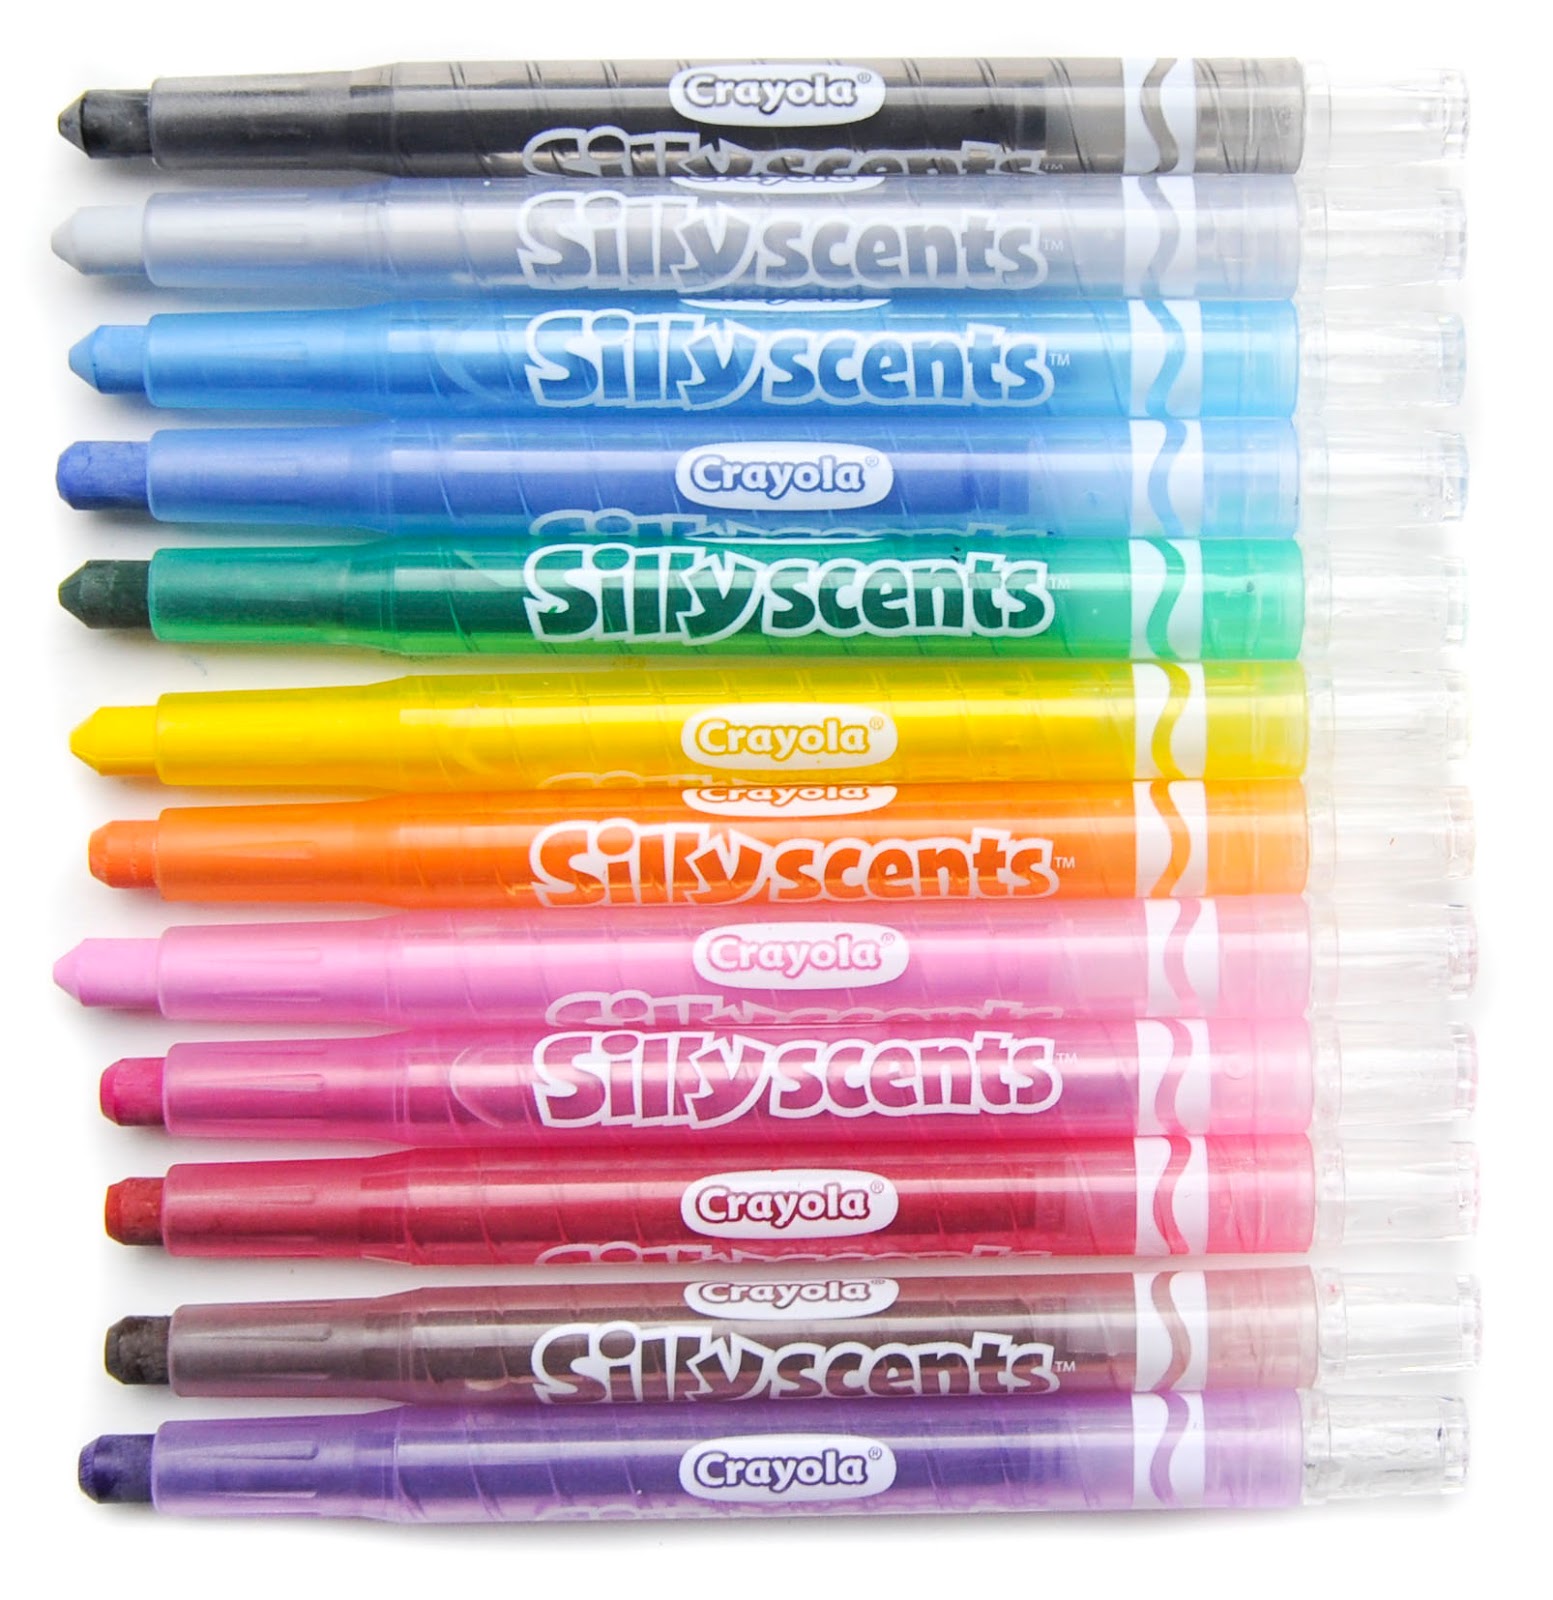 2017 Crayola Silly Scents Review: Markers, Twistable Crayons